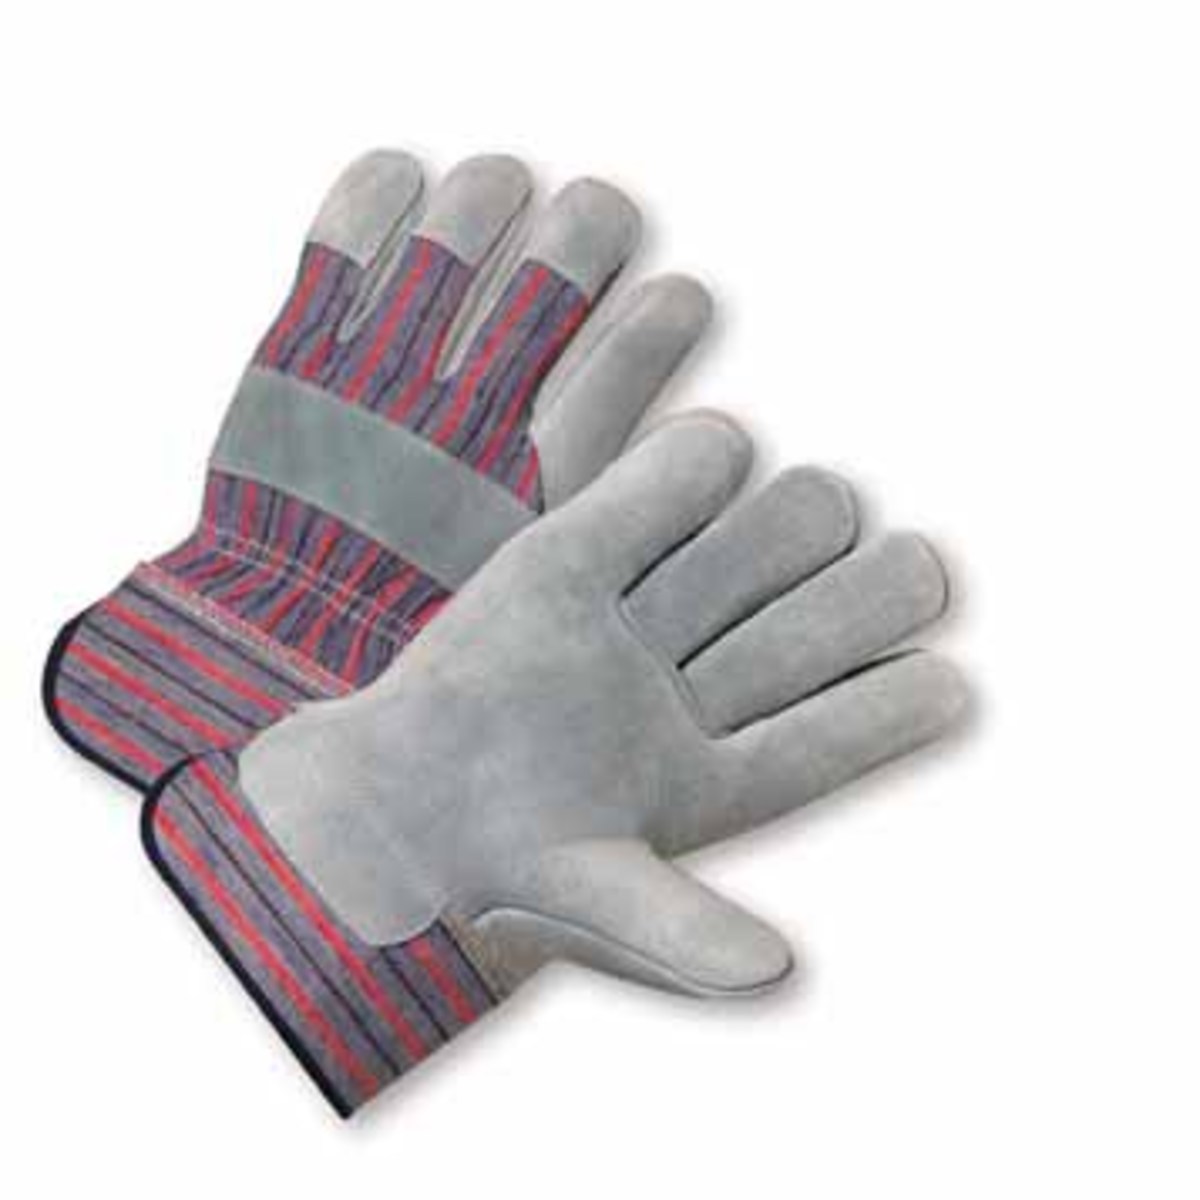 PIP® X-Large Standard Split Leather Palm Gloves With Canvas Back And Rubberized Safety Cuff